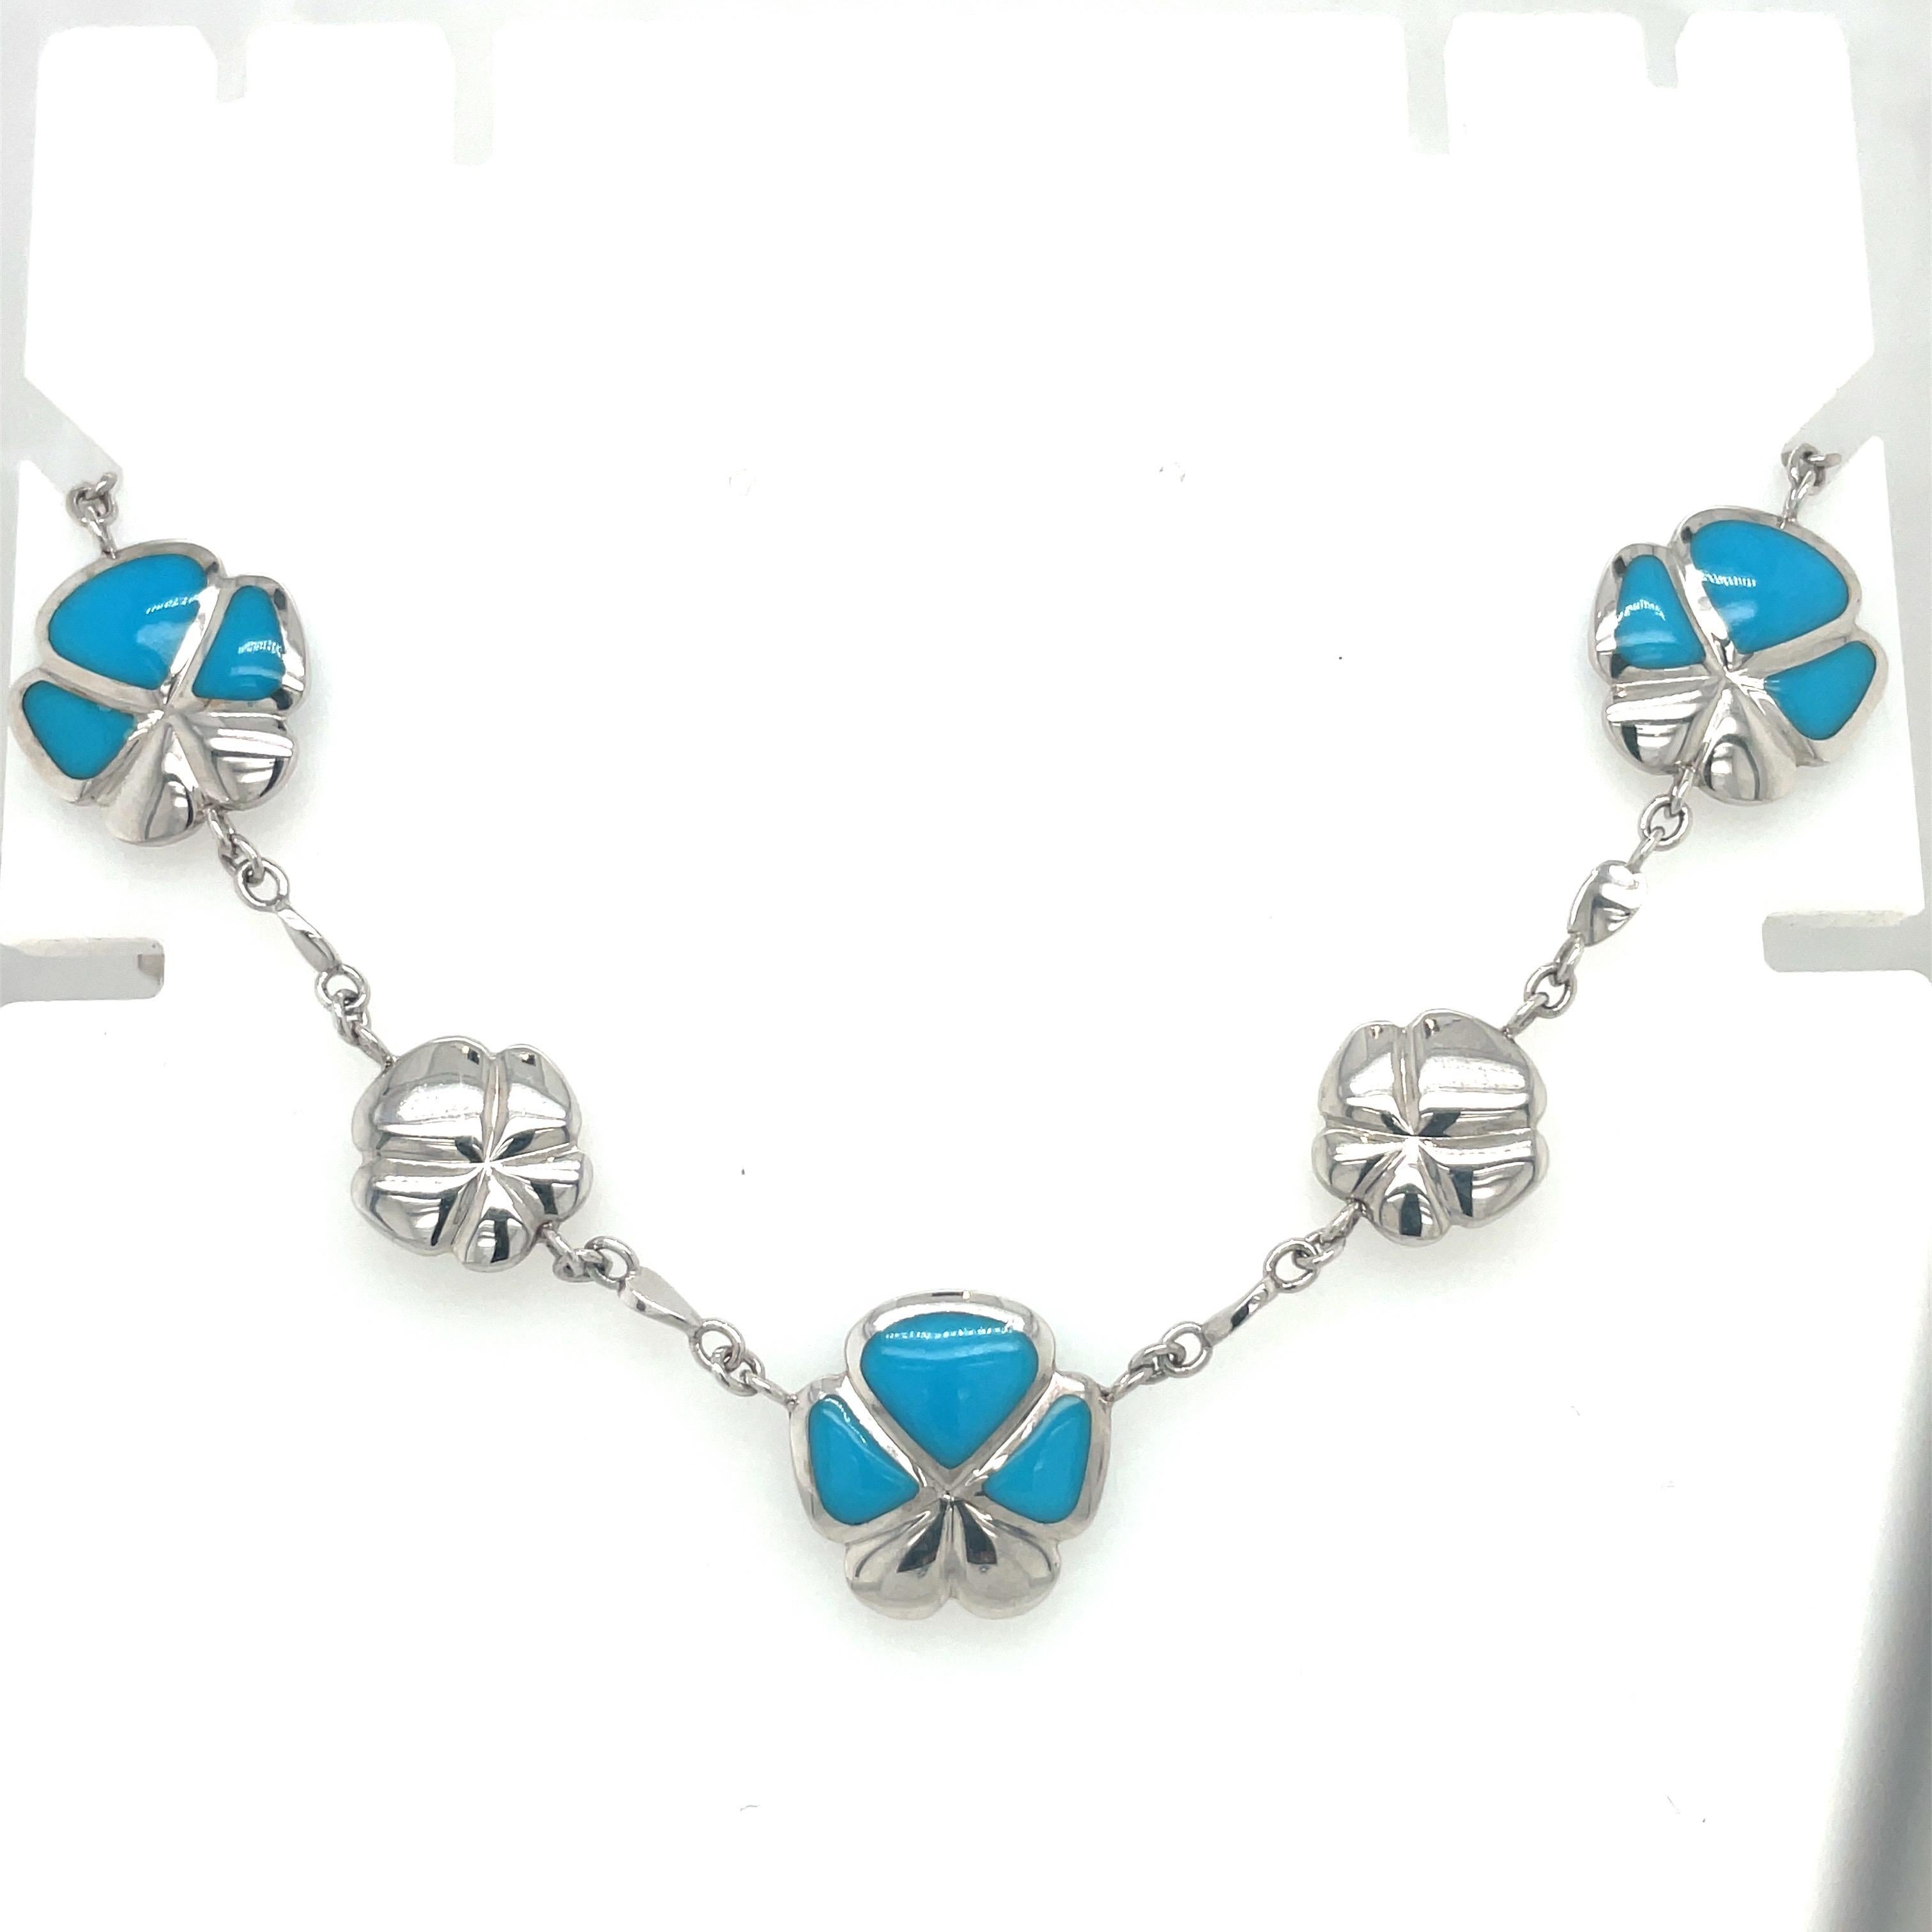 Contemporary Amnbrosi 18KT White Gold & Turquoise Viola Flower Necklace For Sale